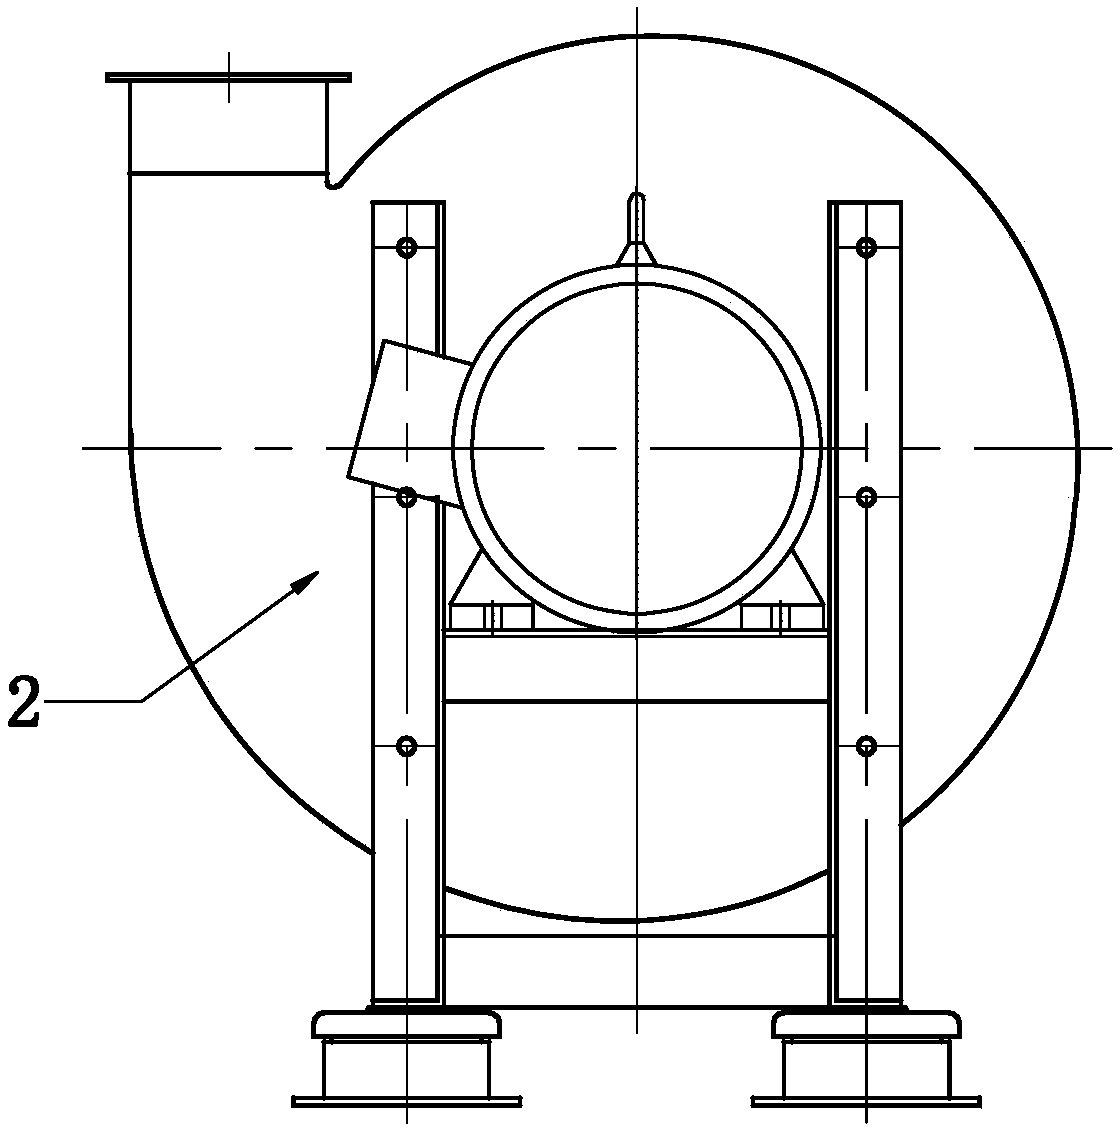 Single-suction single-stage centrifugal fan with medium-high pressure and medium-large flow